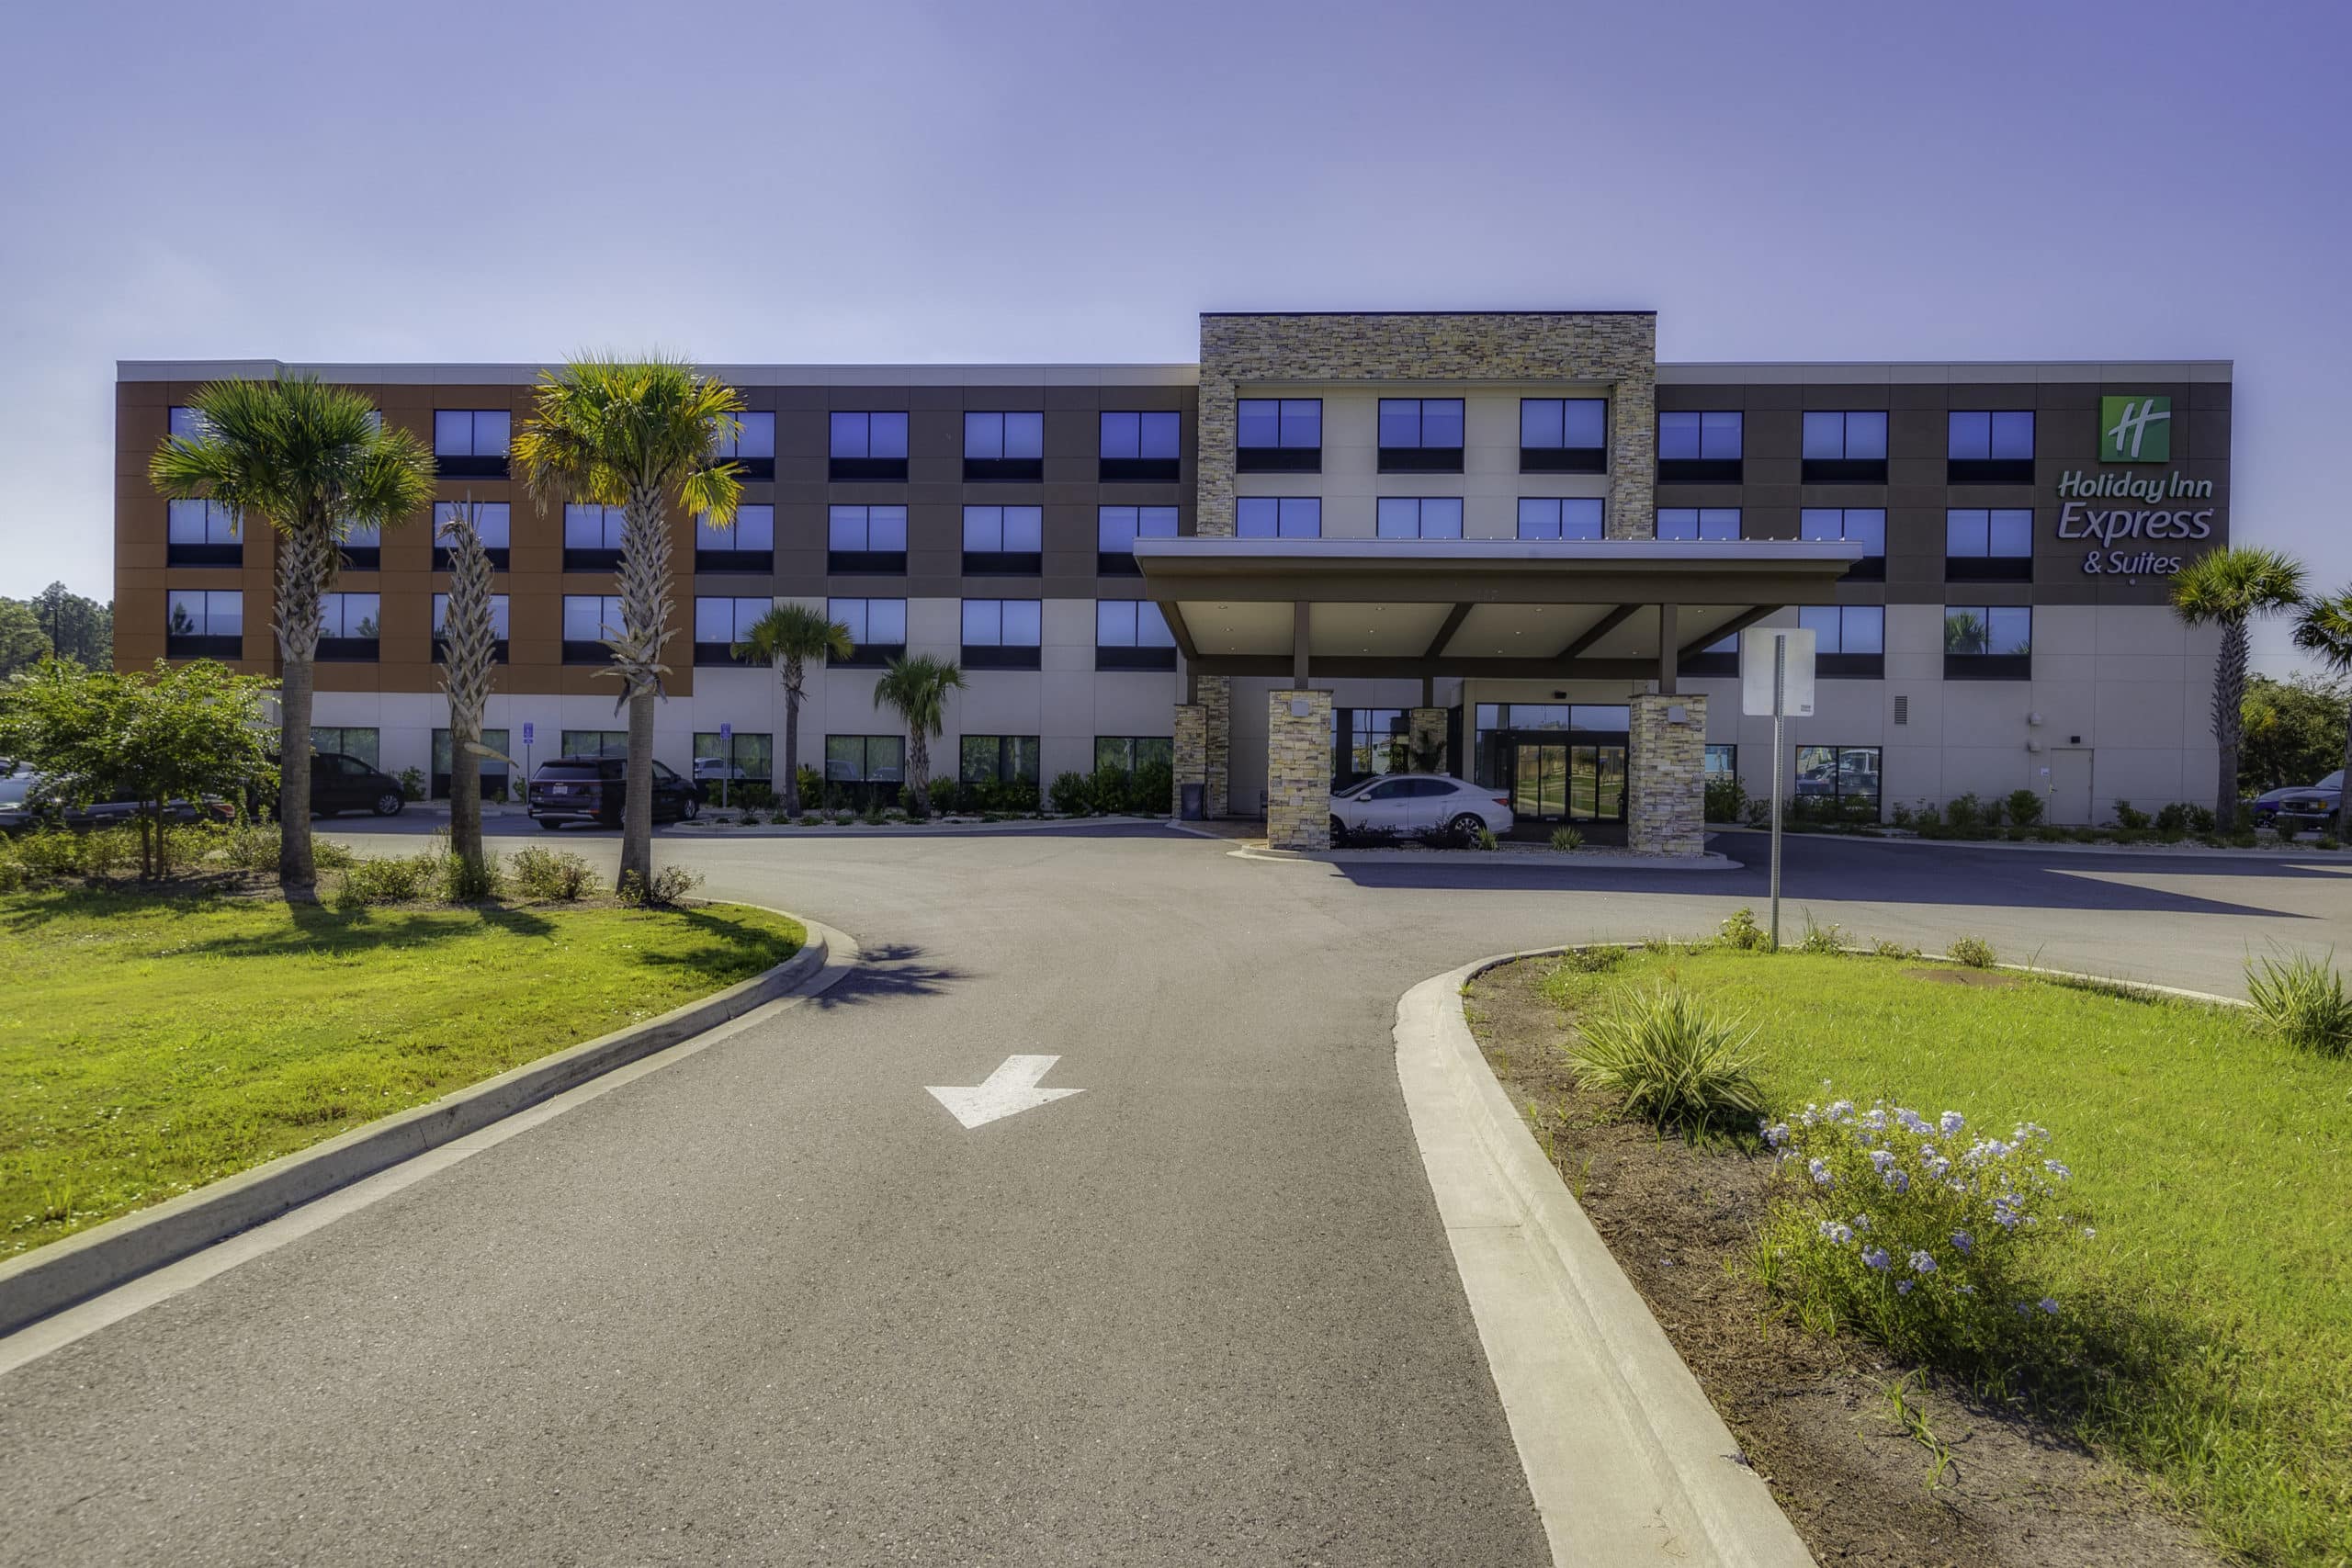 Holliday Inn Express & Suites